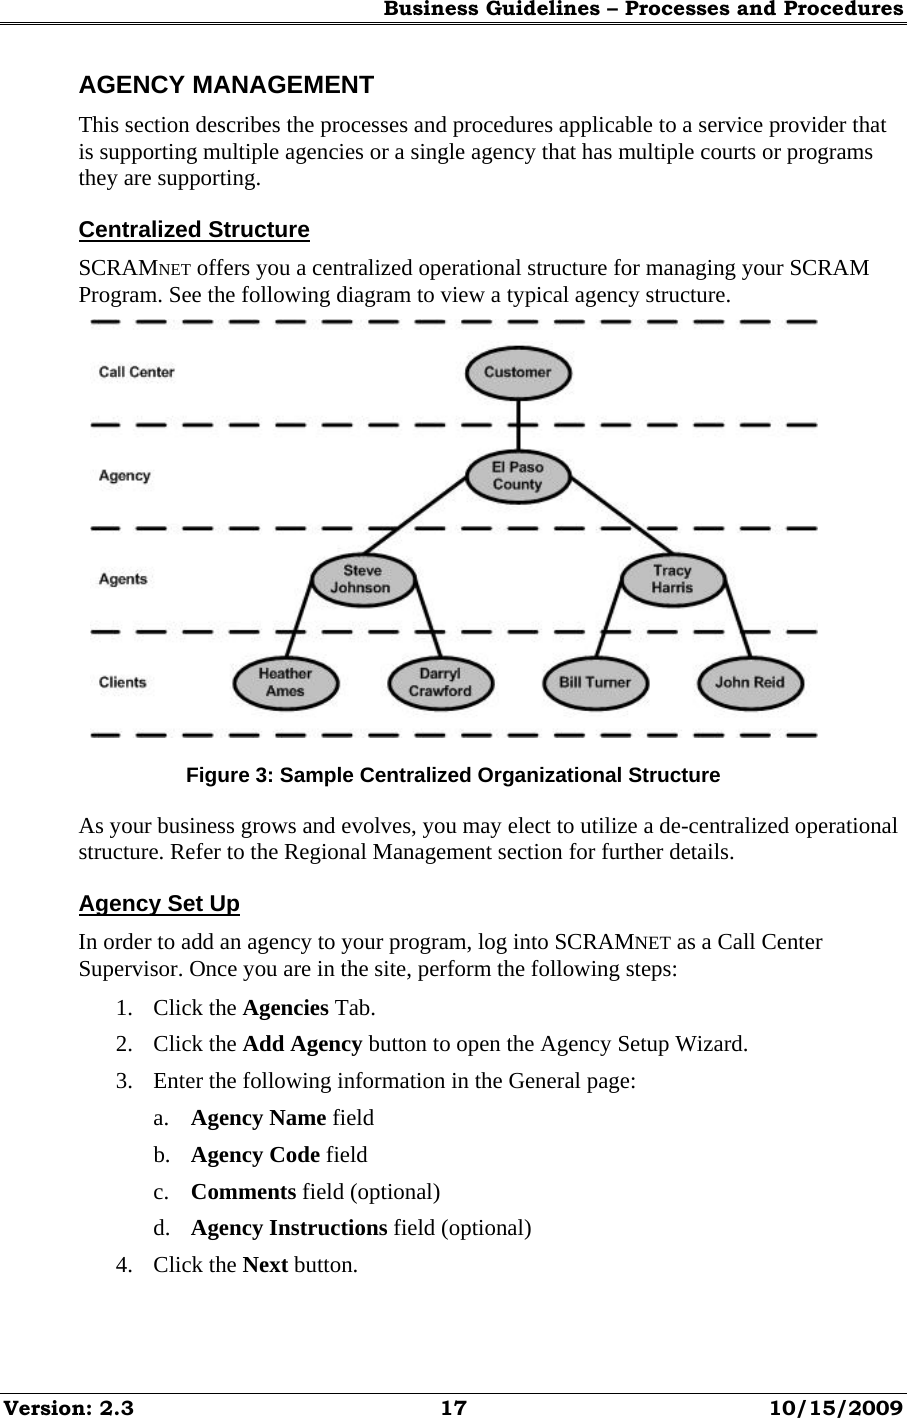 Business Guidelines – Processes and Procedures Version: 2.3  17  10/15/2009 AGENCY MANAGEMENT This section describes the processes and procedures applicable to a service provider that is supporting multiple agencies or a single agency that has multiple courts or programs they are supporting. Centralized Structure SCRAMNET offers you a centralized operational structure for managing your SCRAM Program. See the following diagram to view a typical agency structure.  Figure 3: Sample Centralized Organizational Structure As your business grows and evolves, you may elect to utilize a de-centralized operational structure. Refer to the Regional Management section for further details. Agency Set Up In order to add an agency to your program, log into SCRAMNET as a Call Center Supervisor. Once you are in the site, perform the following steps: 1. Click the Agencies Tab. 2. Click the Add Agency button to open the Agency Setup Wizard. 3. Enter the following information in the General page: a. Agency Name field b. Agency Code field c. Comments field (optional) d. Agency Instructions field (optional) 4. Click the Next button. 